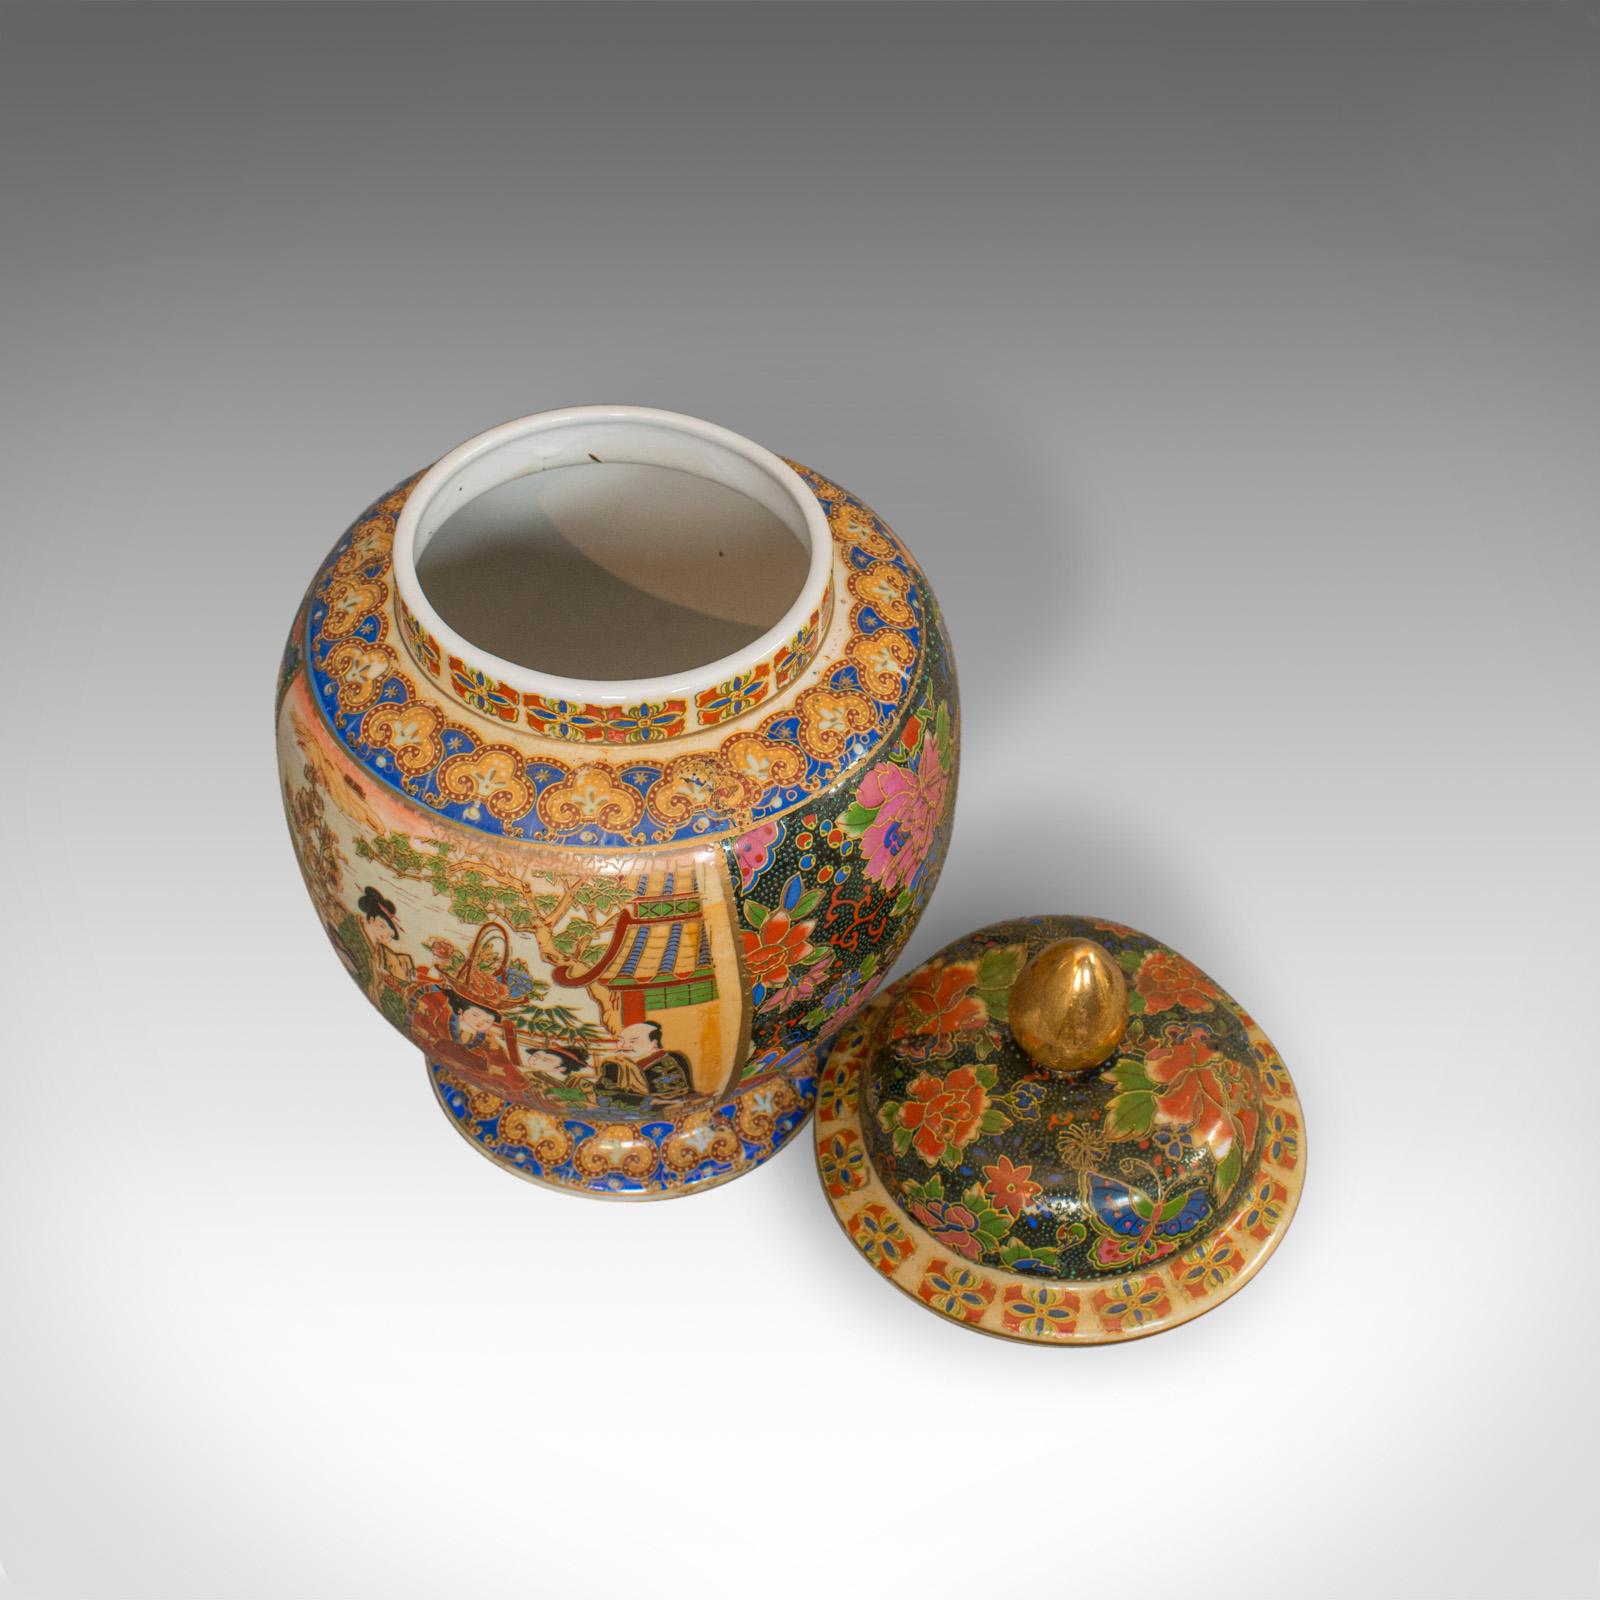 Chinese Export Vintage Spice Jar, Chinese, Decorative, Baluster, Vase, with Lid, 20th Century For Sale